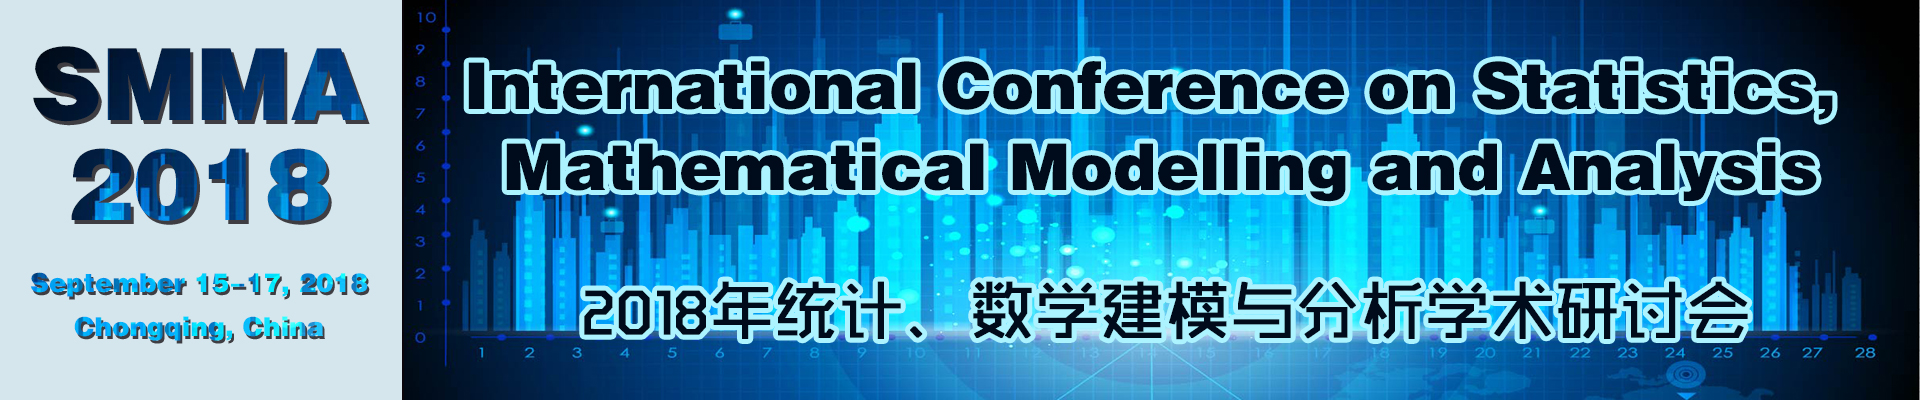 Int. Conf. on Statistics, Mathematical Modelling and Analysis